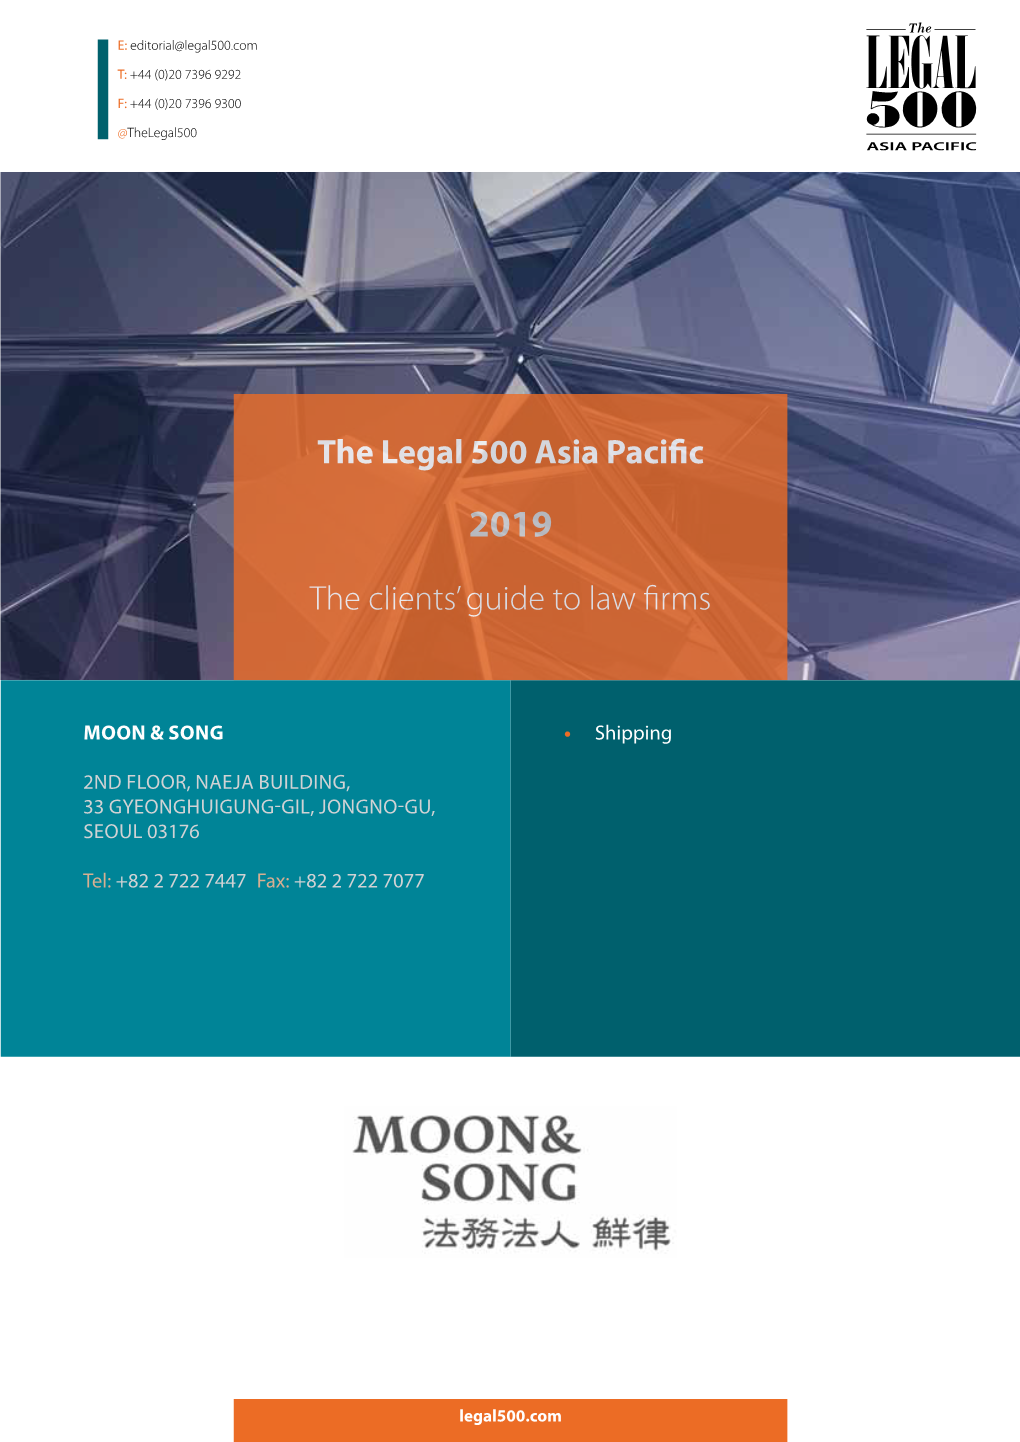 The Legal 500 Asia Pacific the Clients' Guide to Law Firms